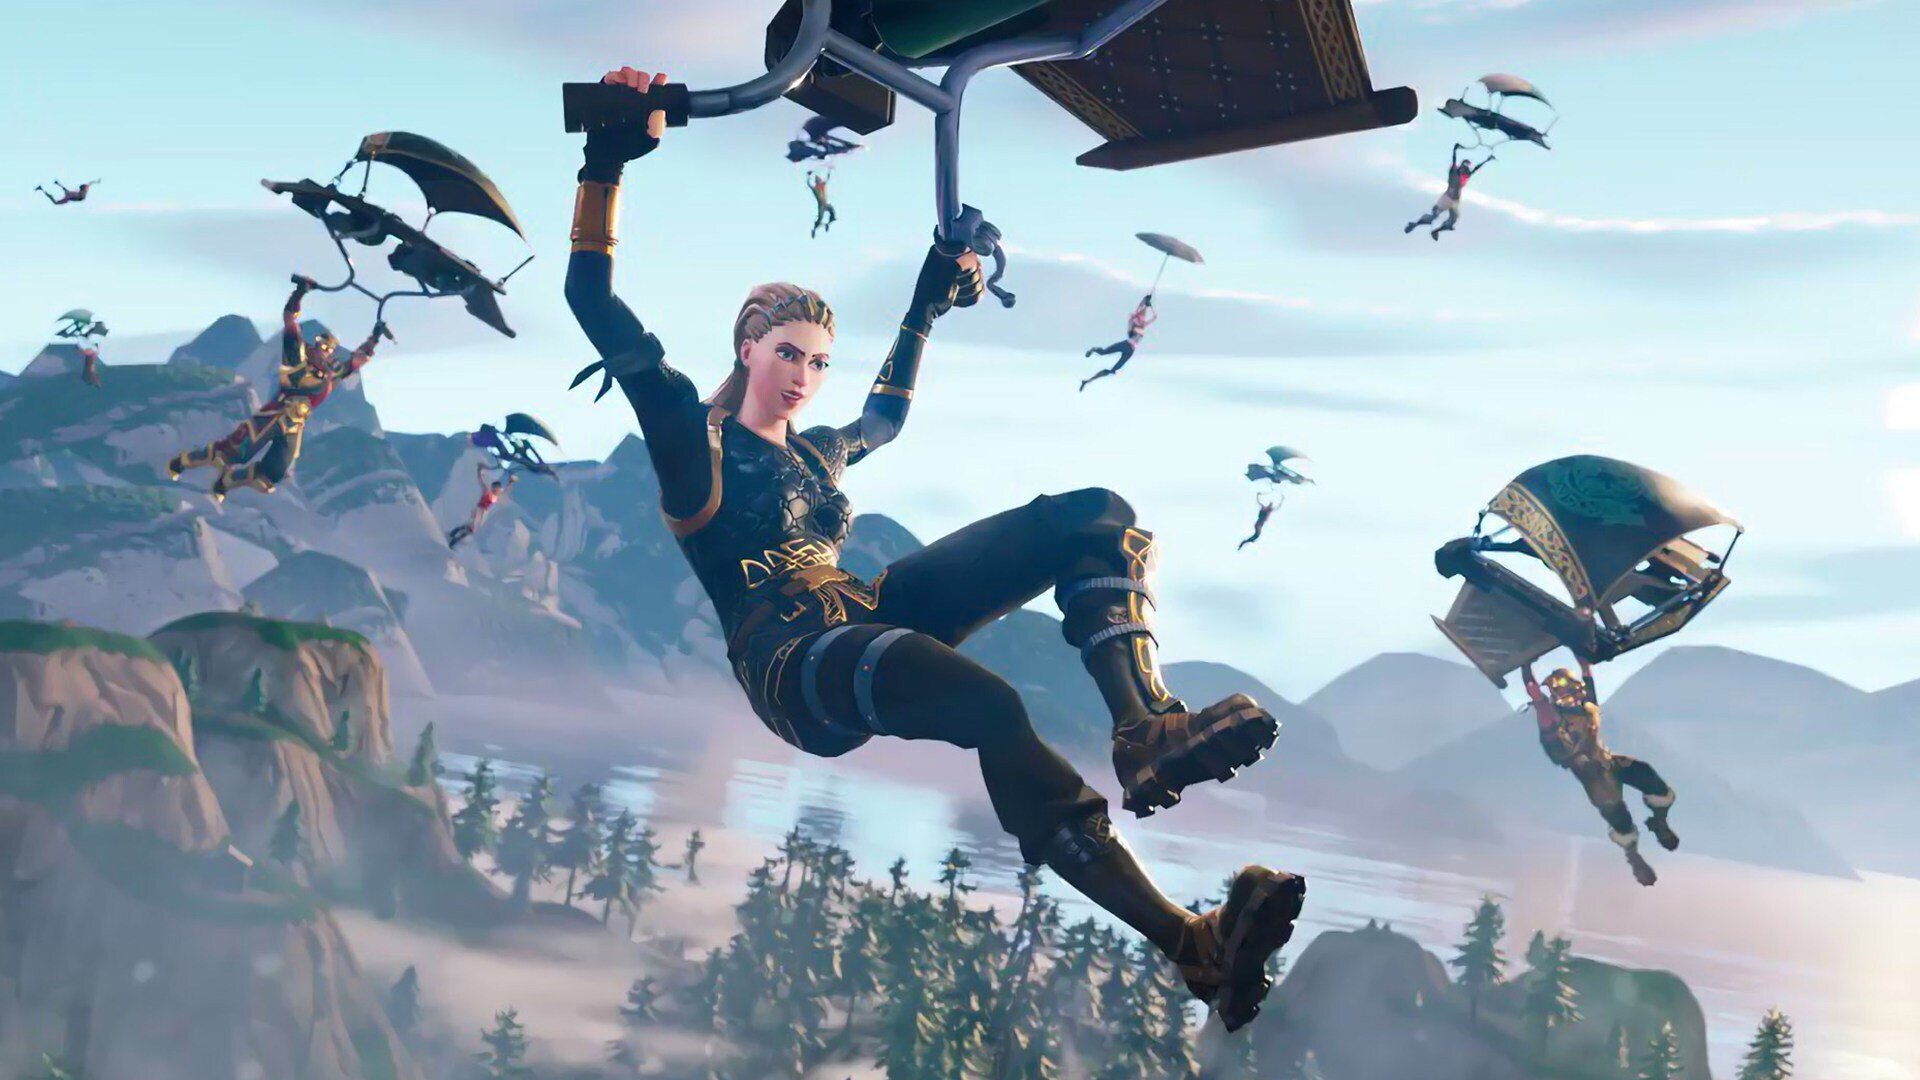 Epic Games announced that they would be removing the glider redeploy mechanic from Fortnite due to negative community feedback.